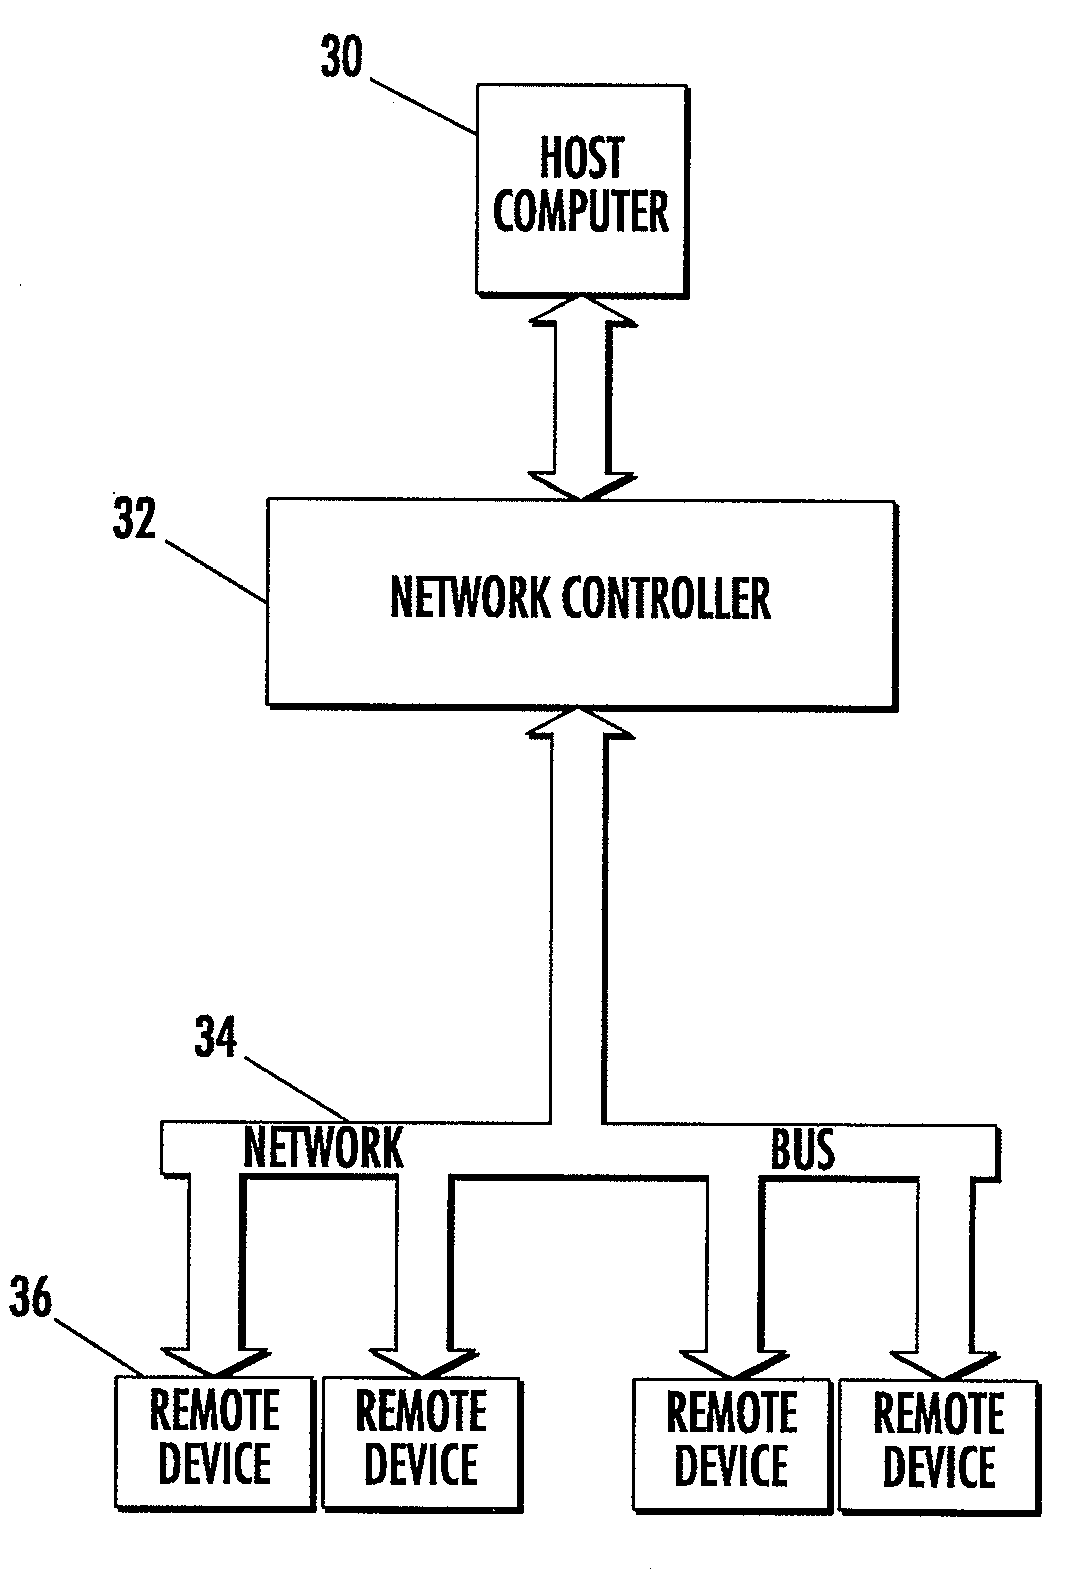 Network controller for digitally controlling remote devices via a common bus